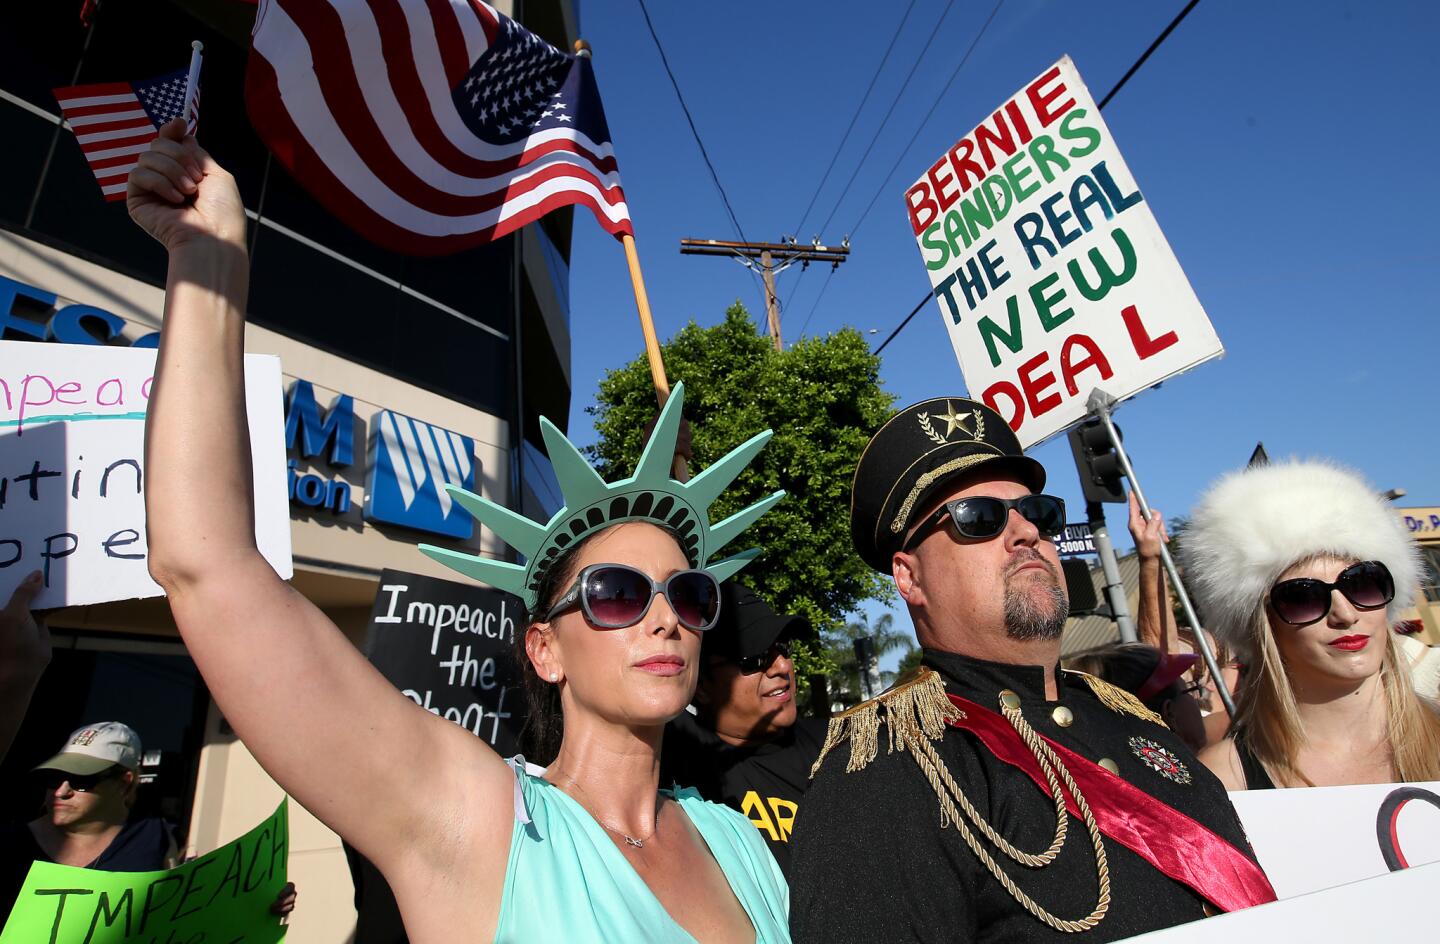 Anti-Trump protesters rally outside the district office of Rep. Brad Sherman in Van Nuys . A Democrat, Sherman has filed articles of impeachment against President Donald J. Trump.